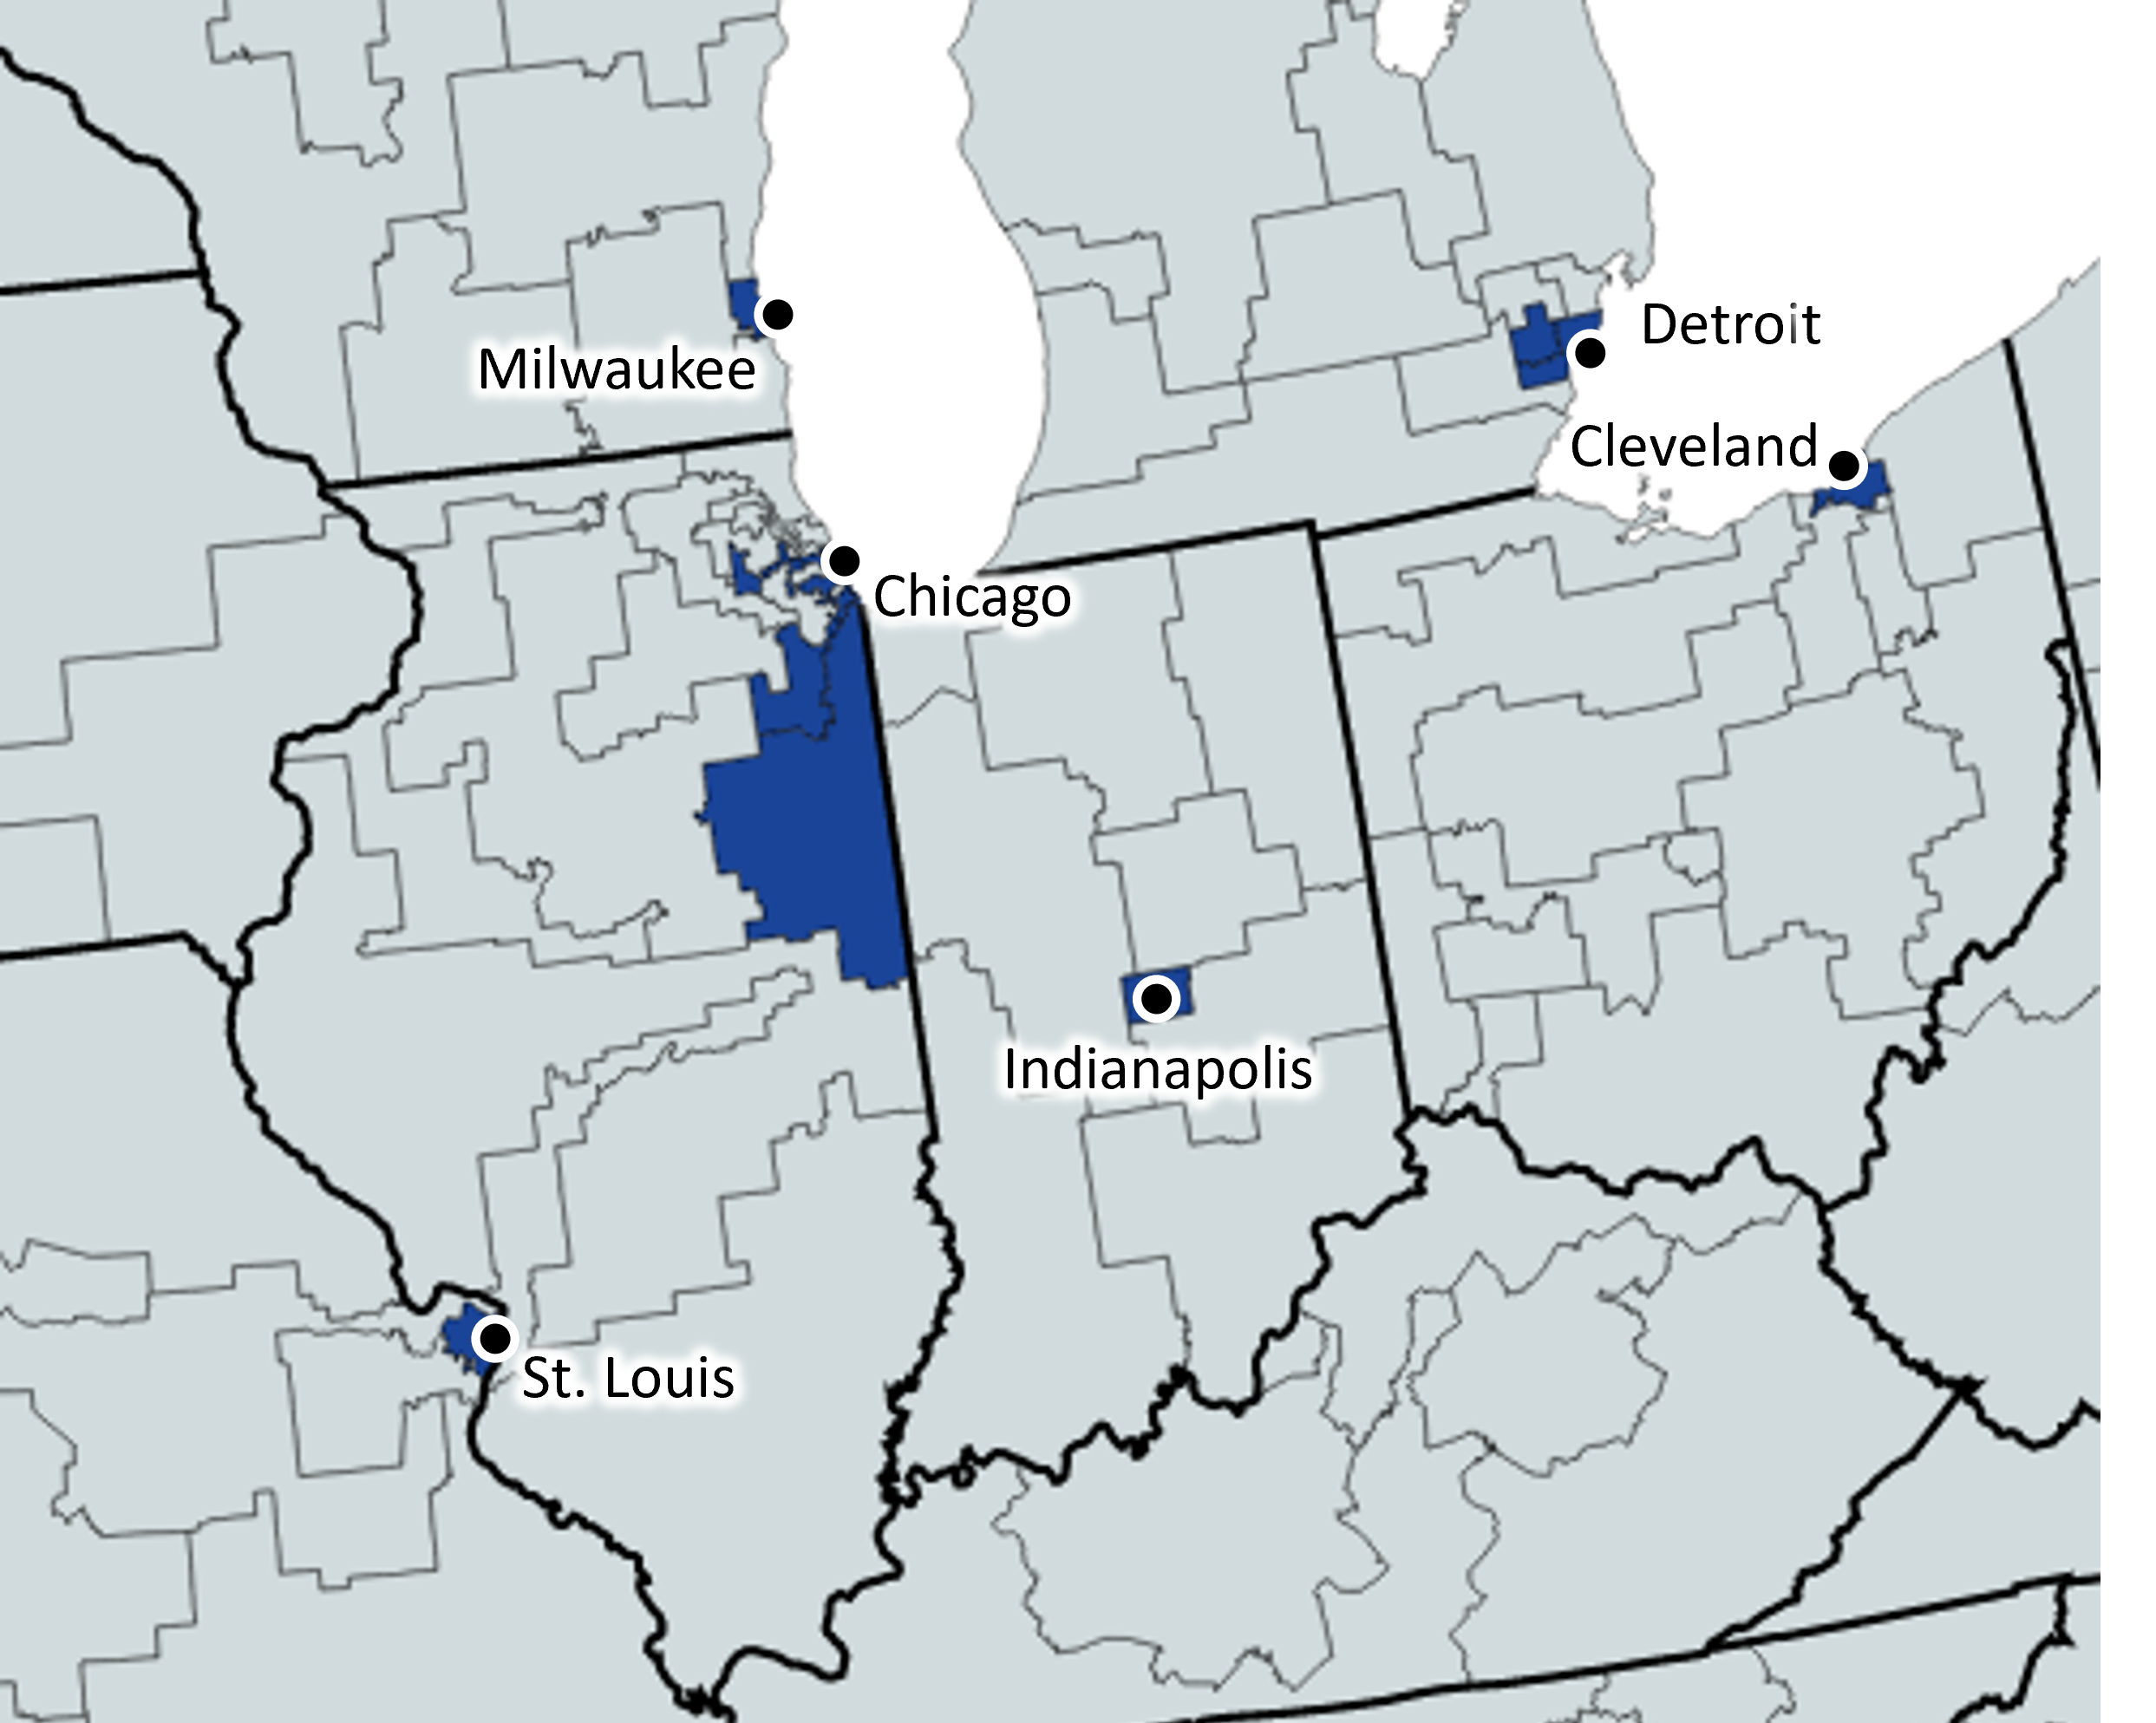 Majority Minority Congressional Districts in the Midwest